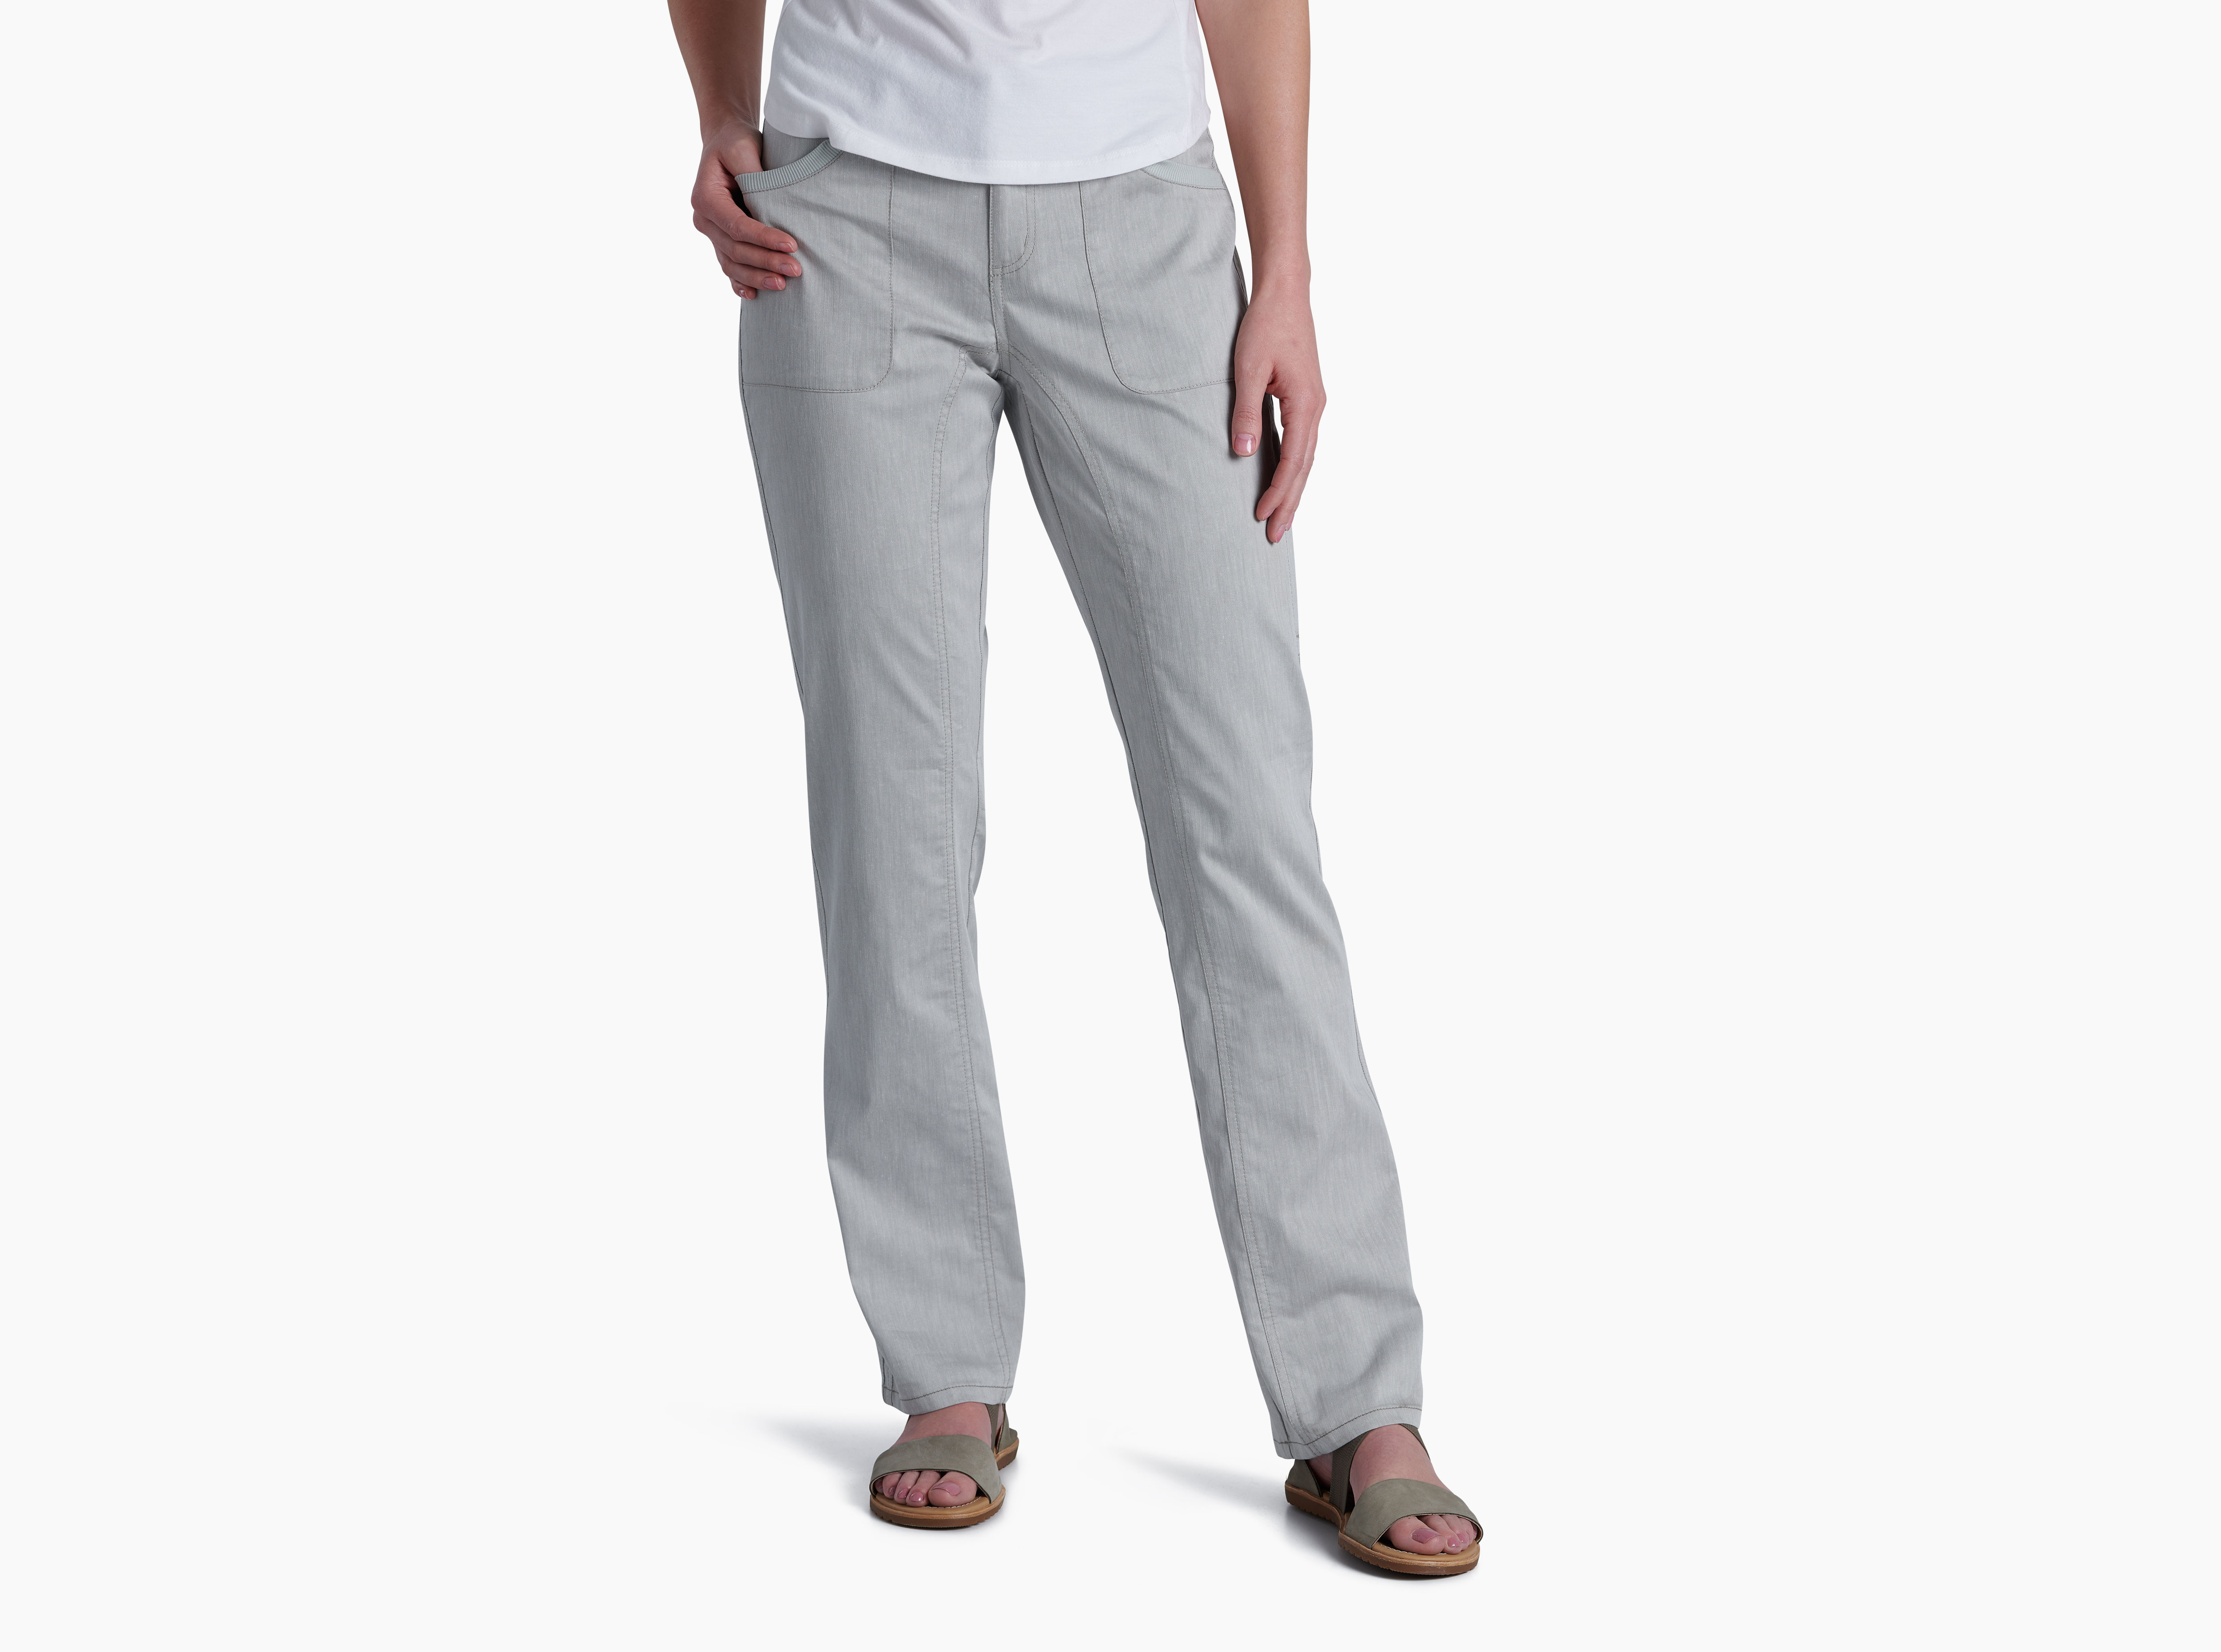 Cabo™ Pant in Women's Pants